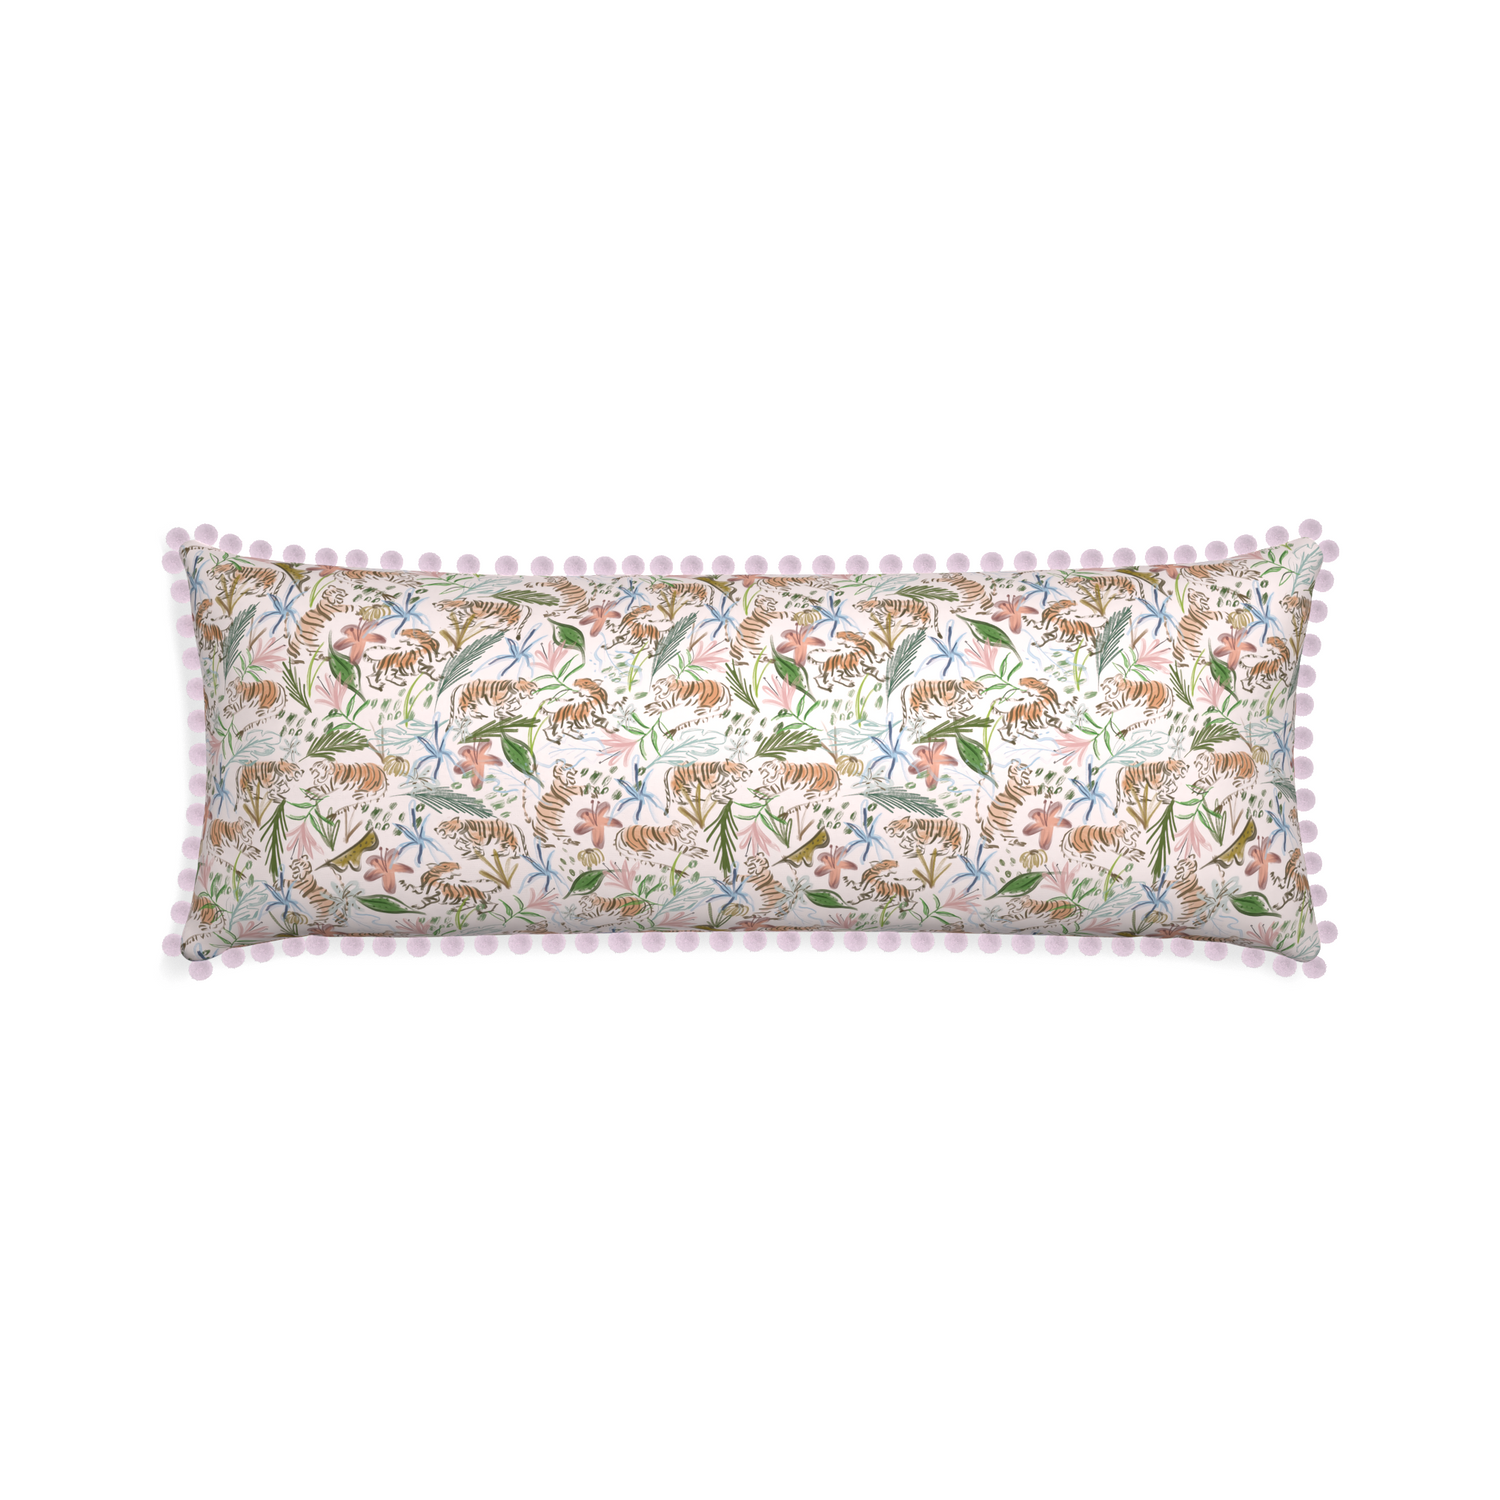 Xl-lumbar frida pink custom pink chinoiserie tigerpillow with l on white background